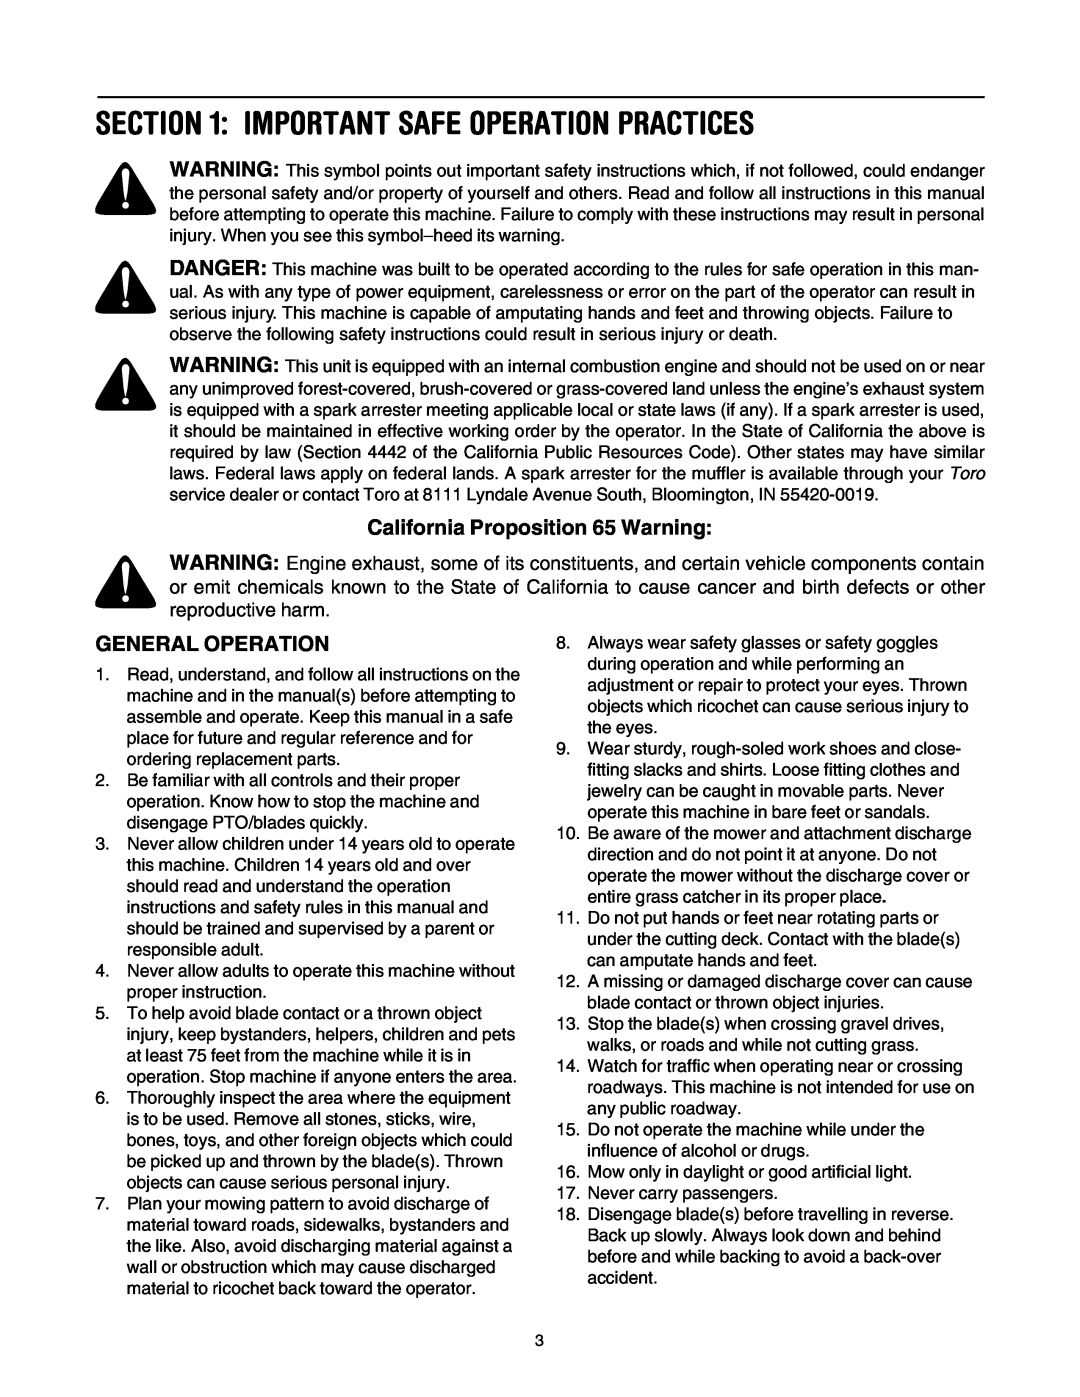 Toro 14AQ81RP544, 14AK81RK544 Important Safe Operation Practices, California Proposition 65 Warning, General Operation 